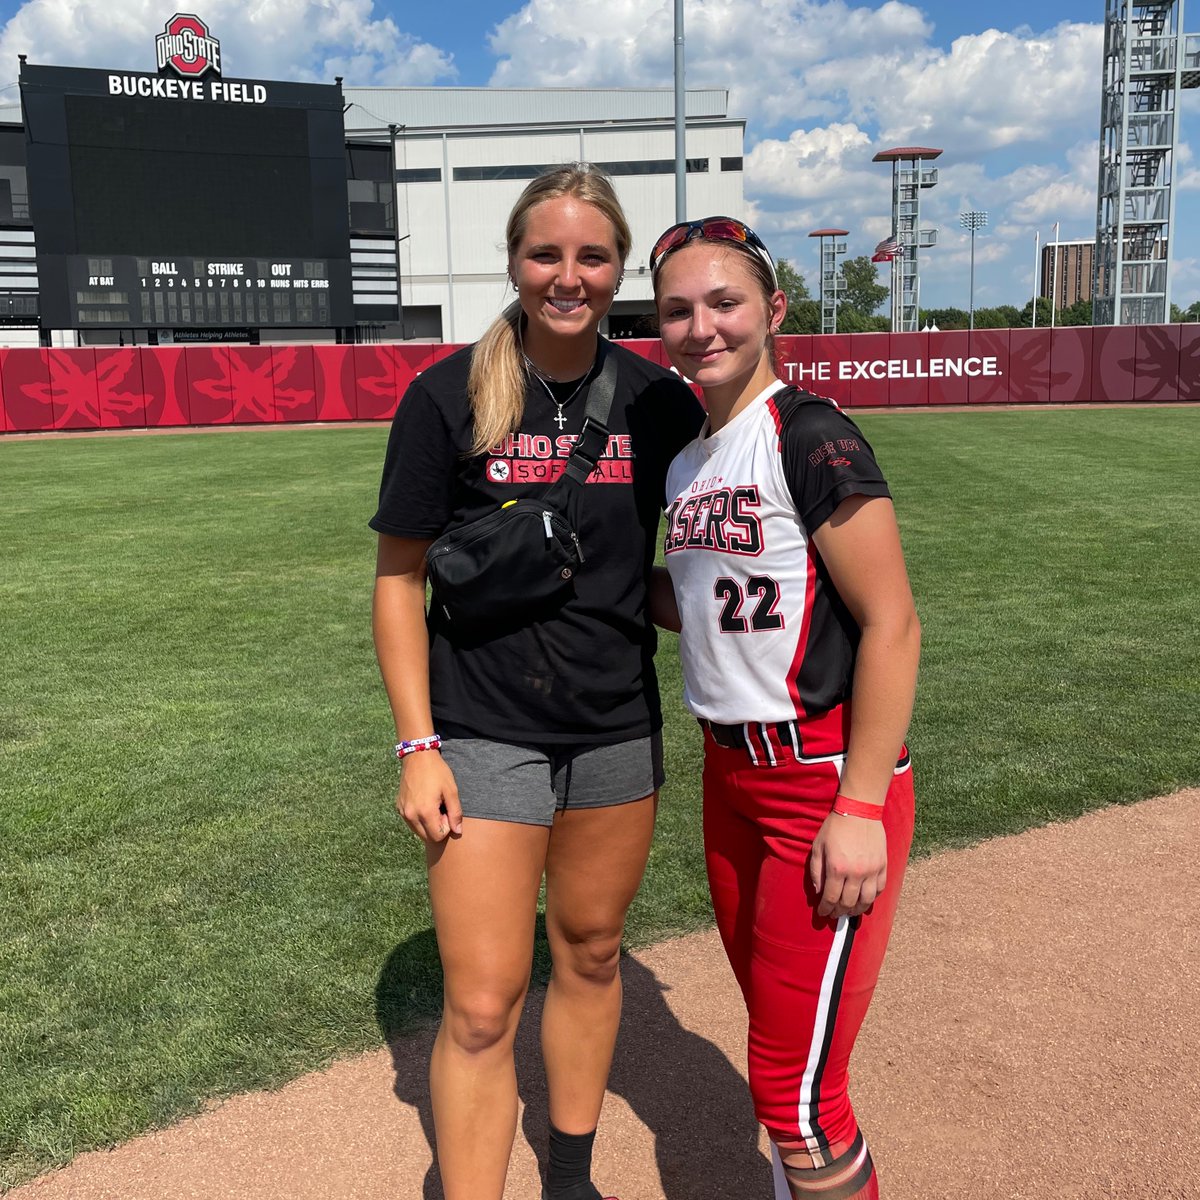 Loved being @OhioStateSB camp with @cortellettite24 and @KamiKortokrax It's alway so much fun to get to work with the players I look up to! Team Red Coaches for the win both days! @LasersScarlet07